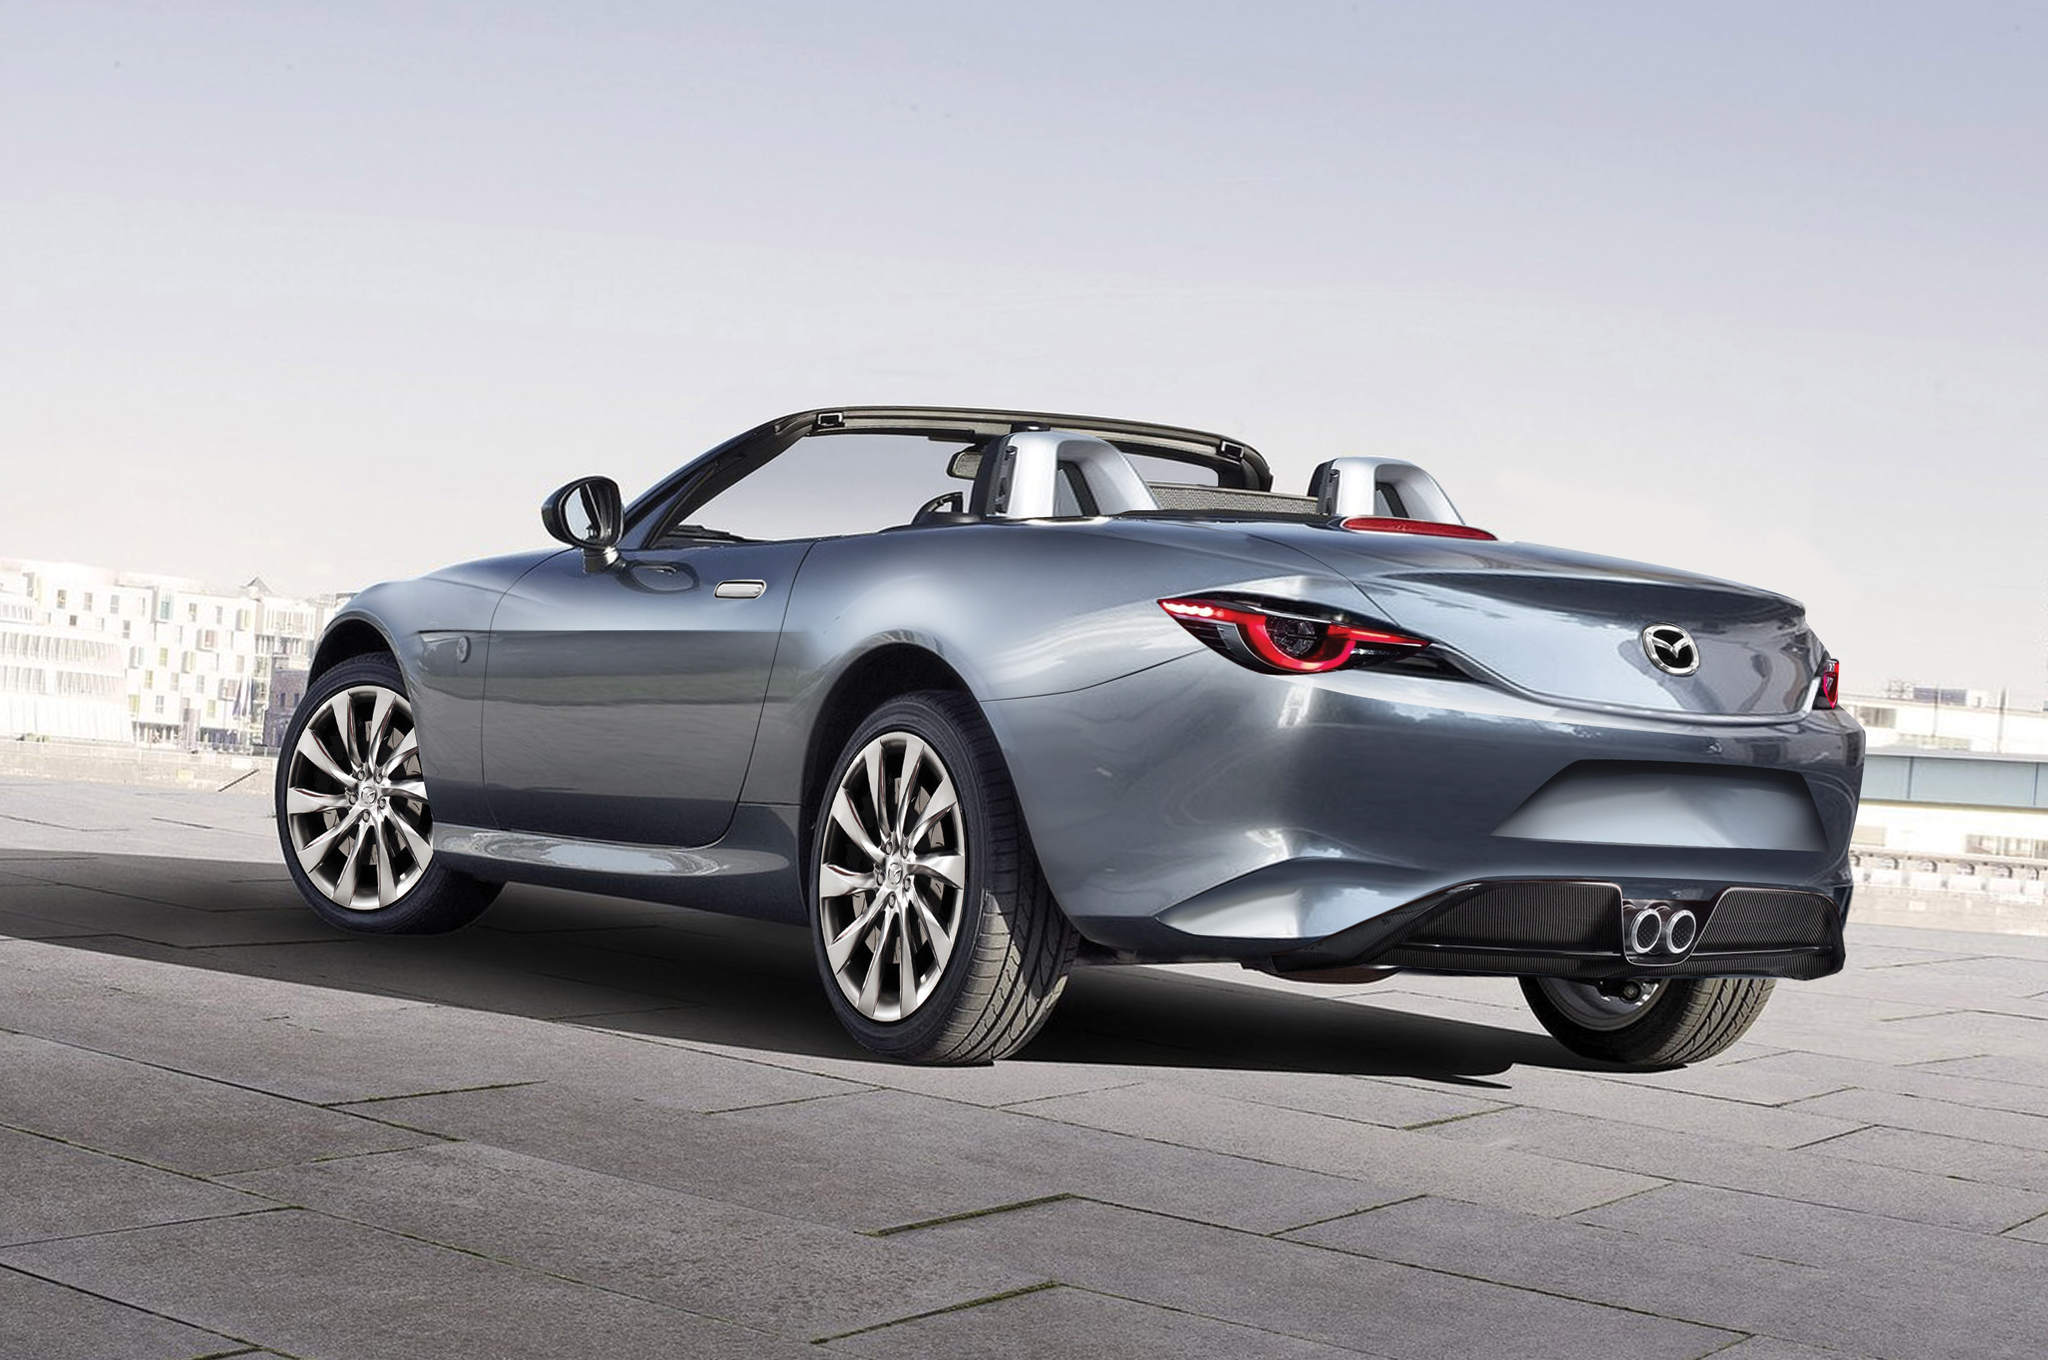 New 2015 Mazda MX-5 Overview with Photo Gallery - InspirationSeek.com